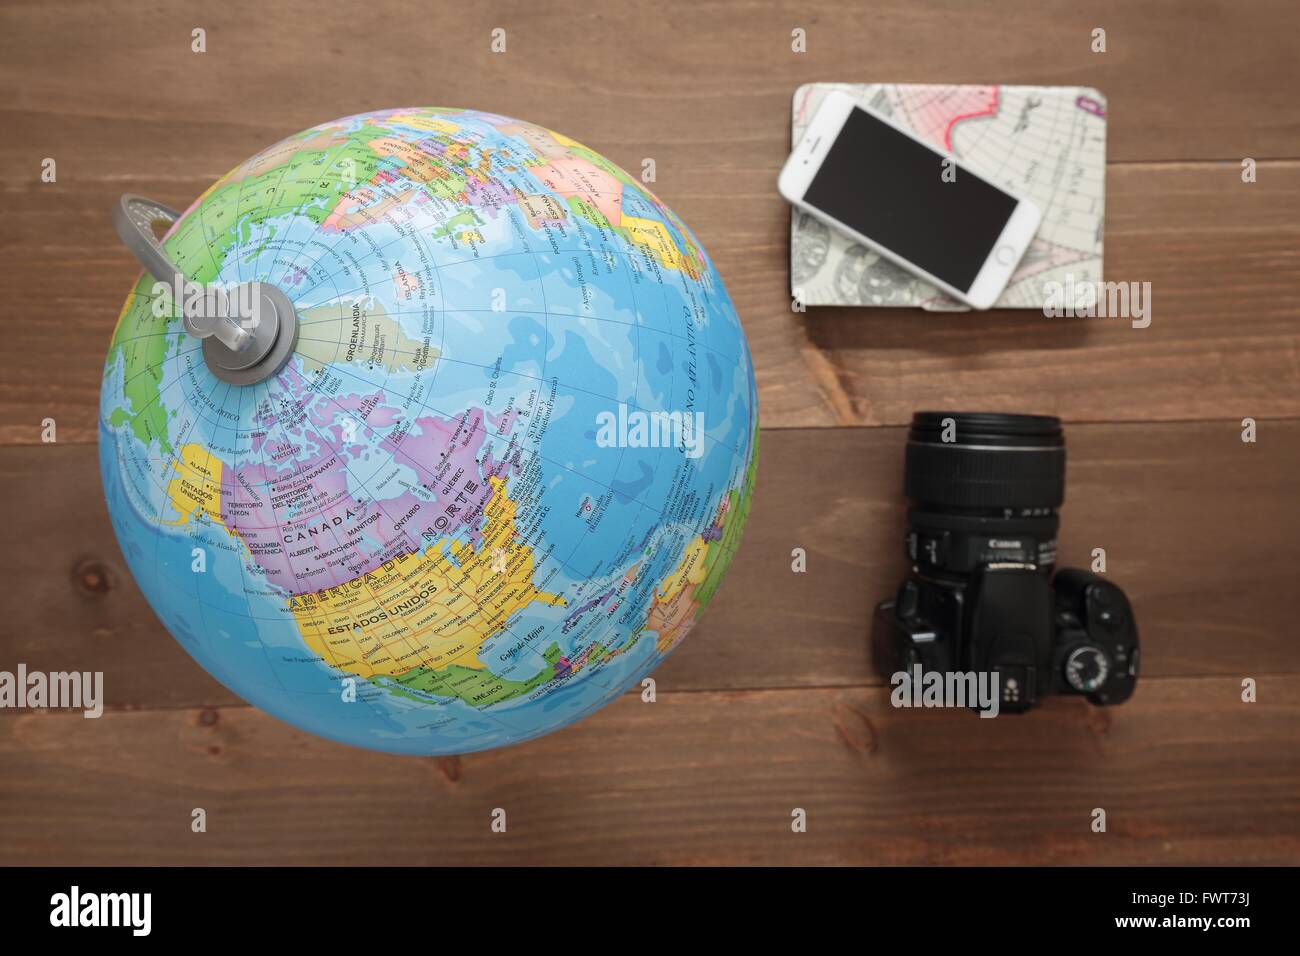 Elche, Spain. March 31, 2016: Globe, camera and mobile on wooden background Stock Photo